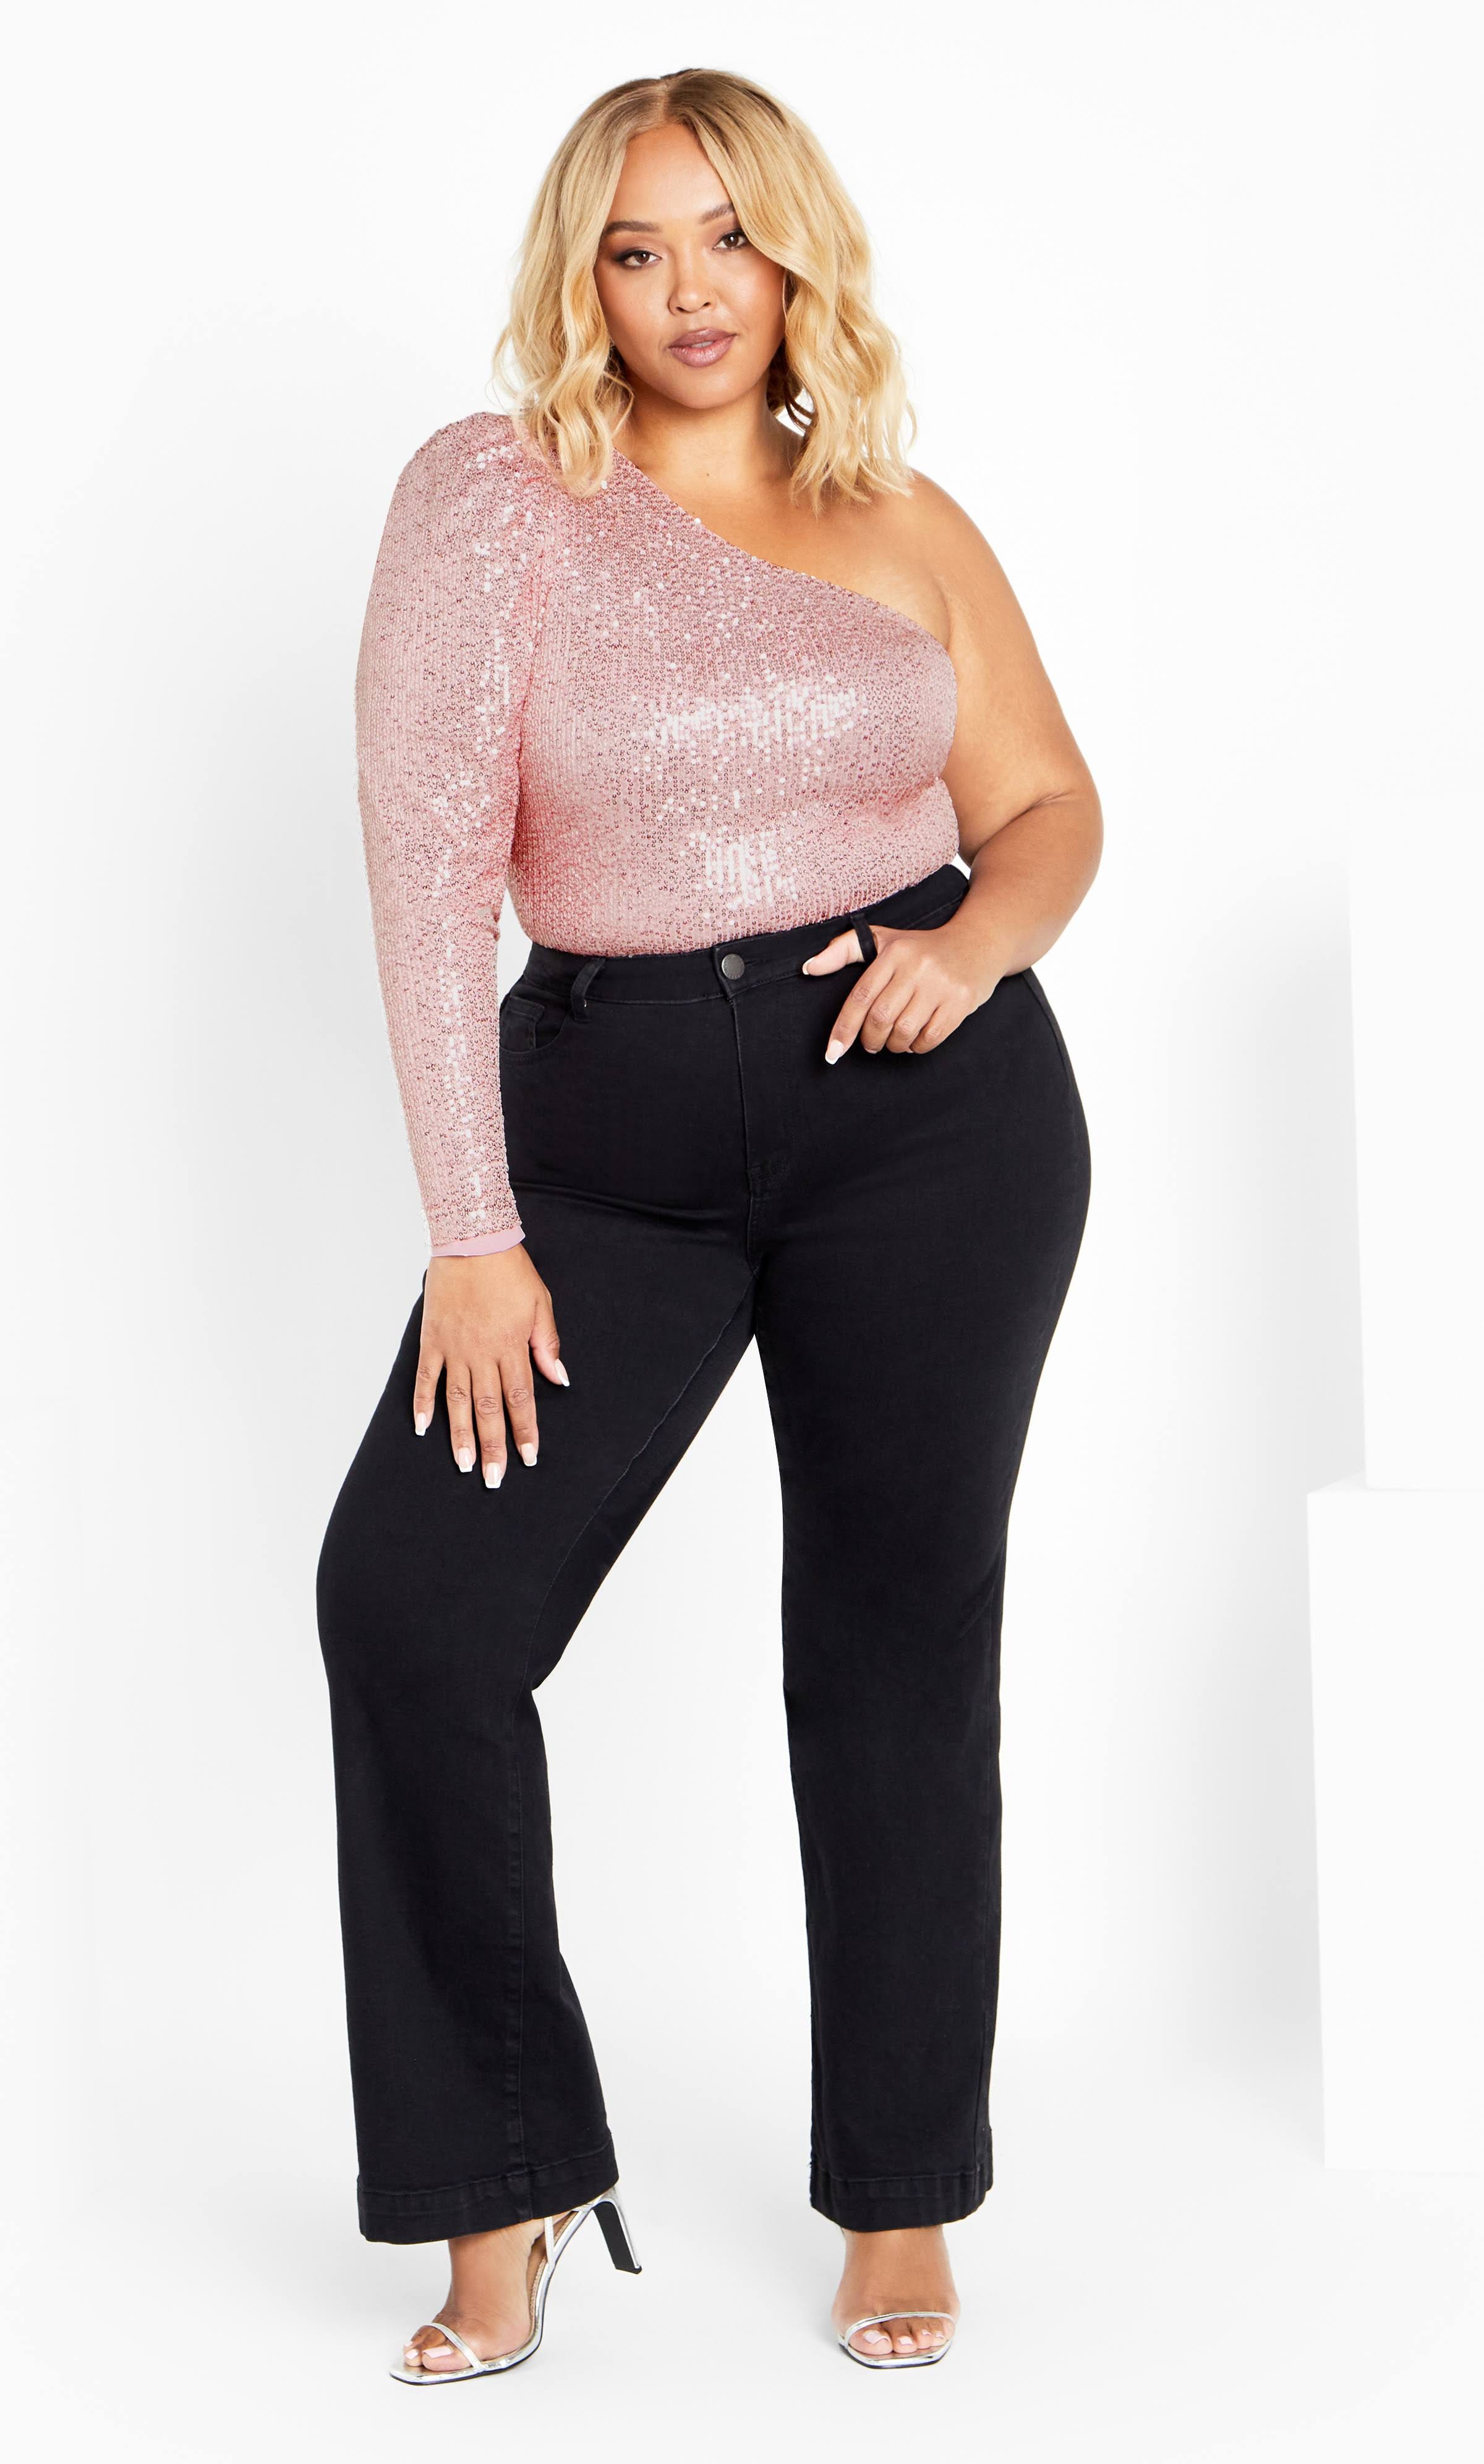 City Chic Women's Full-Coverage Plus Size Sequin Bodysuit in Soft Pink | Image